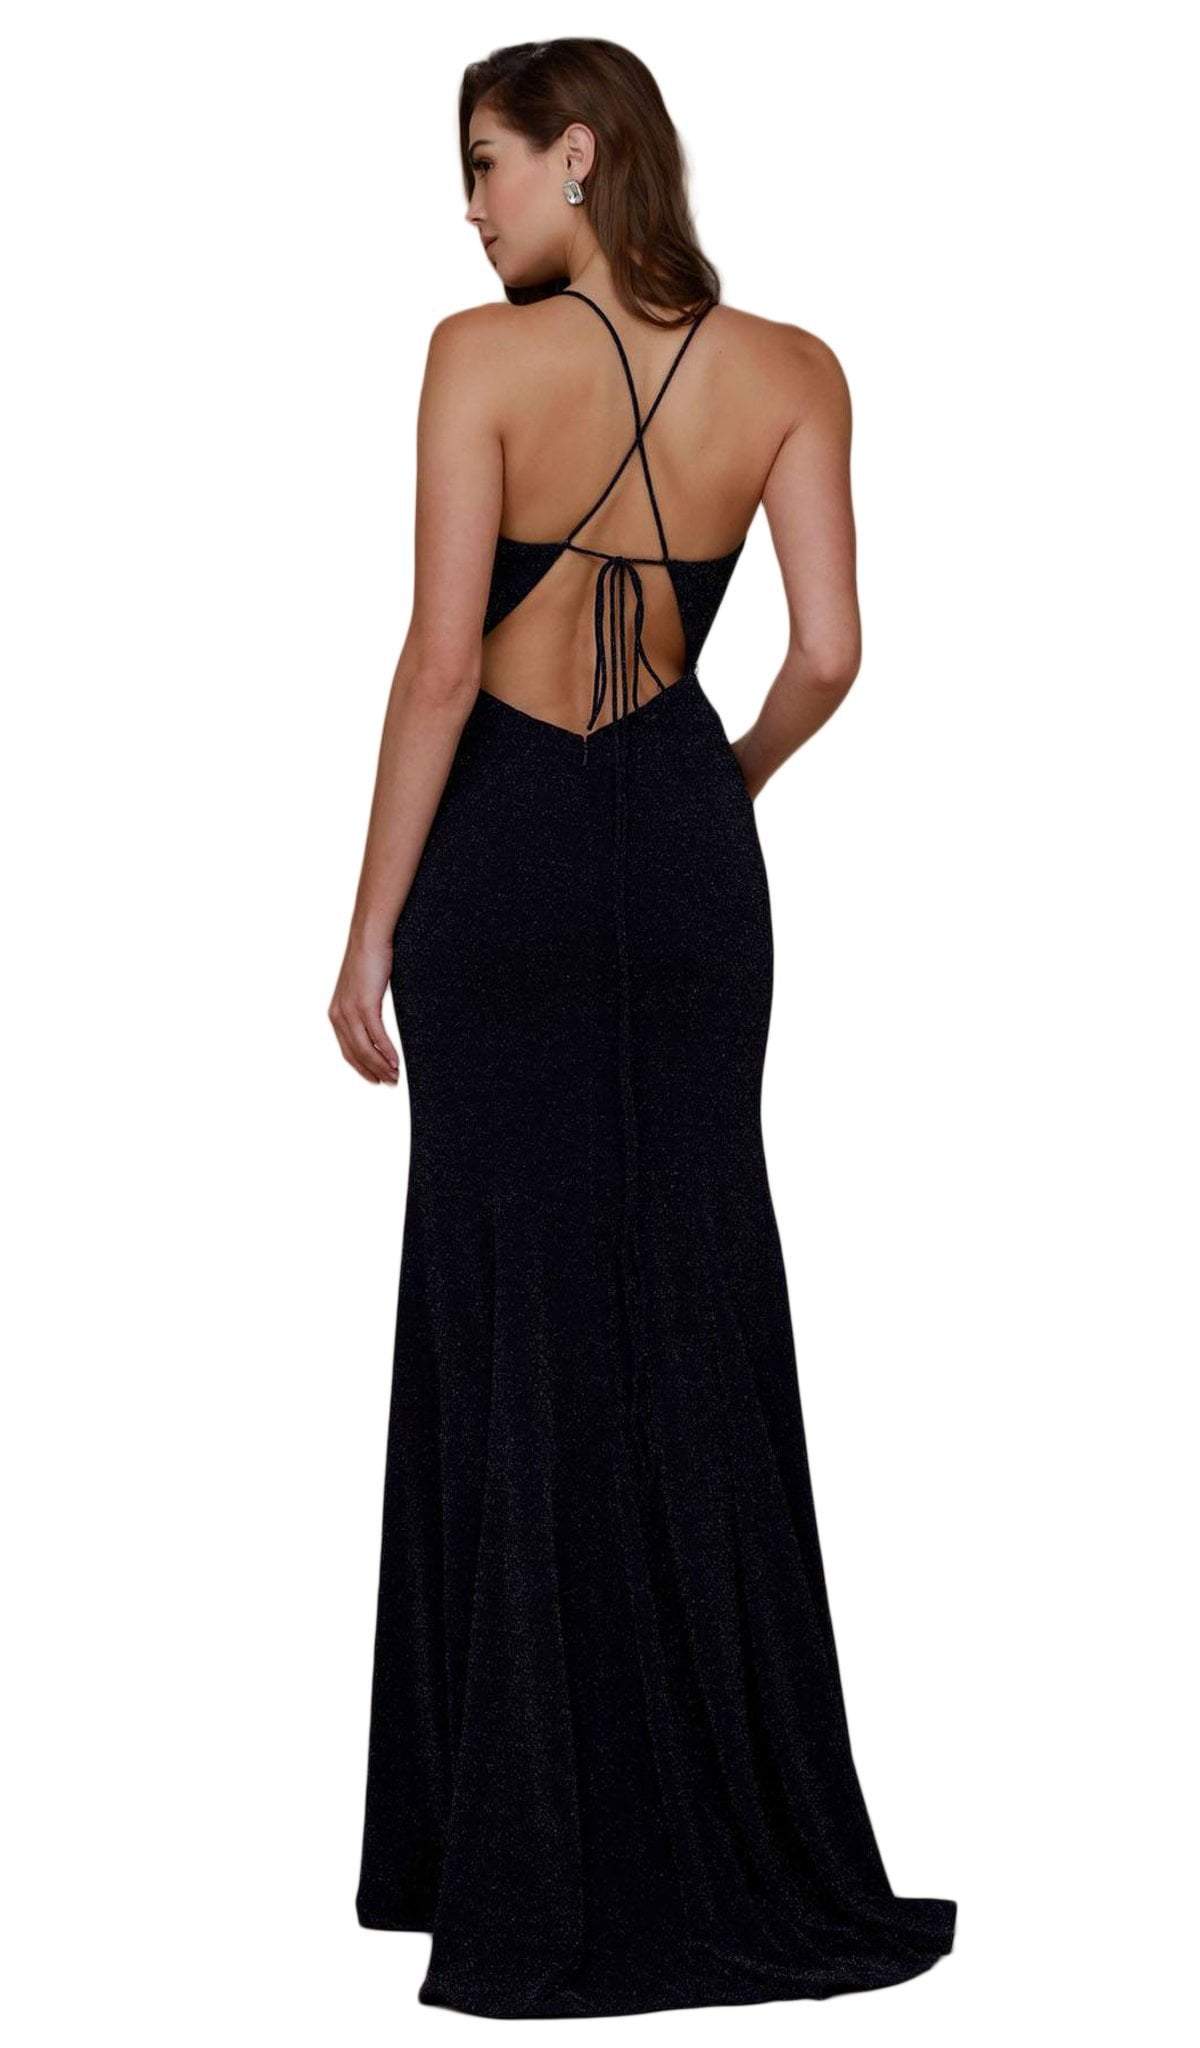 Nox Anabel - N160 Plunging V-Neck Strappy Low Cut Gown Special Occasion Dress